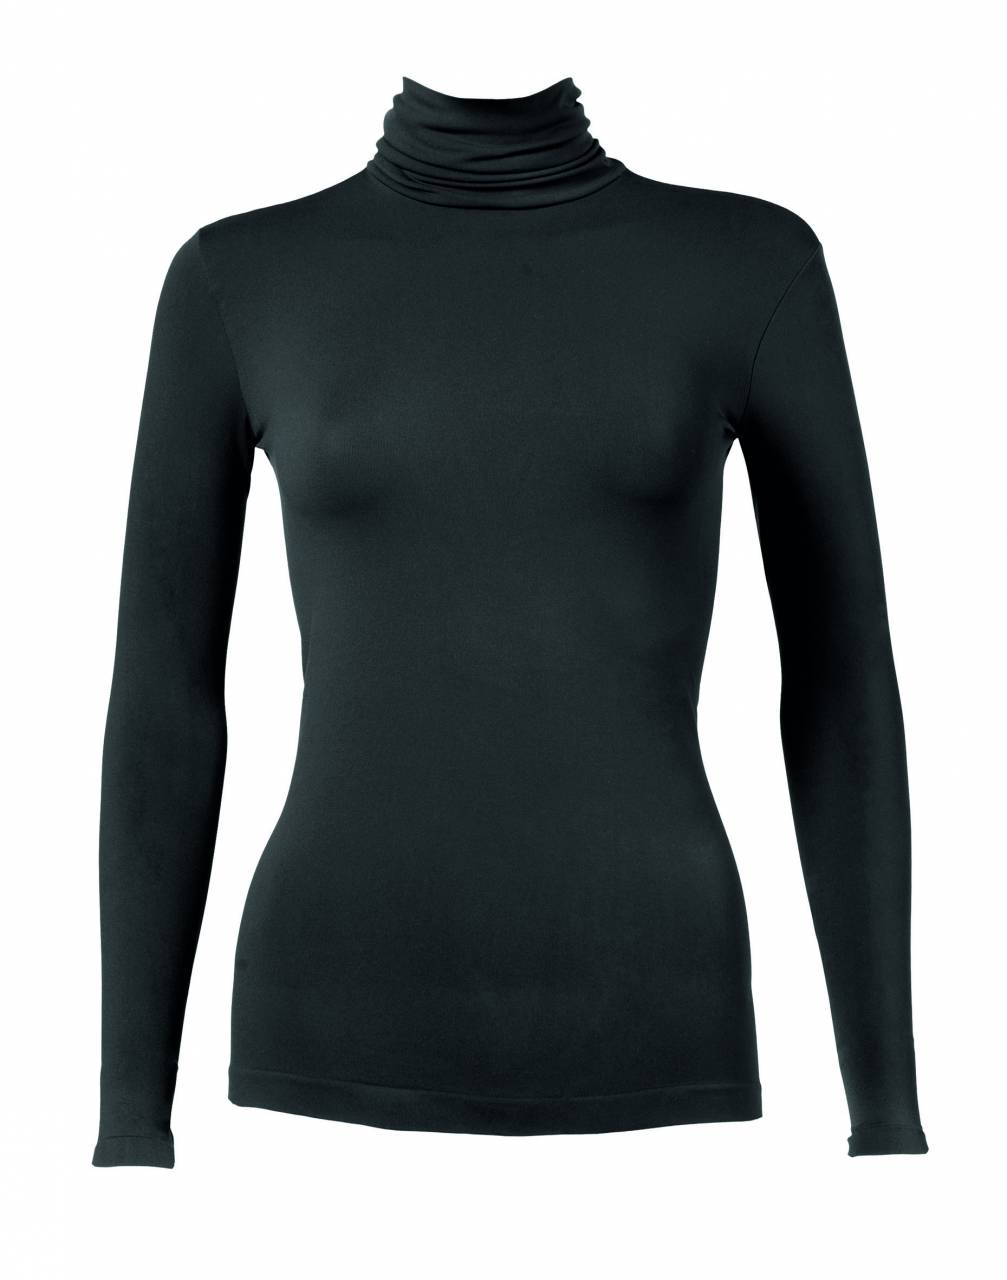 Perfect Line Modal - Turtle Neck Long Sleeves